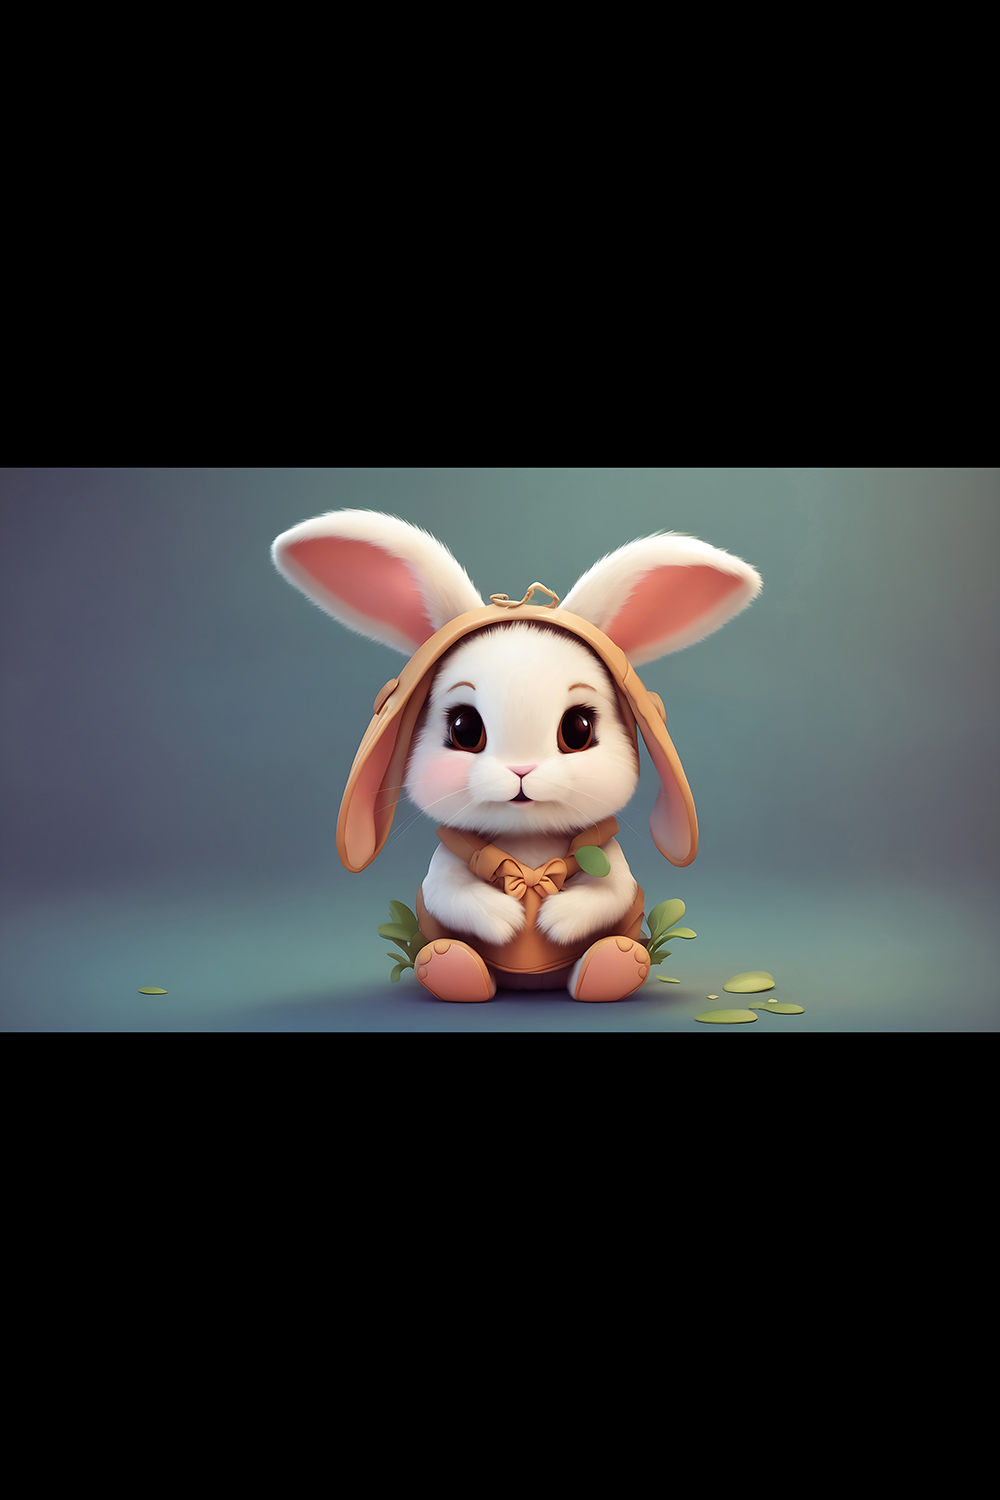 Cute pixar style pink baby rabbit sitting on a abstruct background - ai generated pinterest preview image.